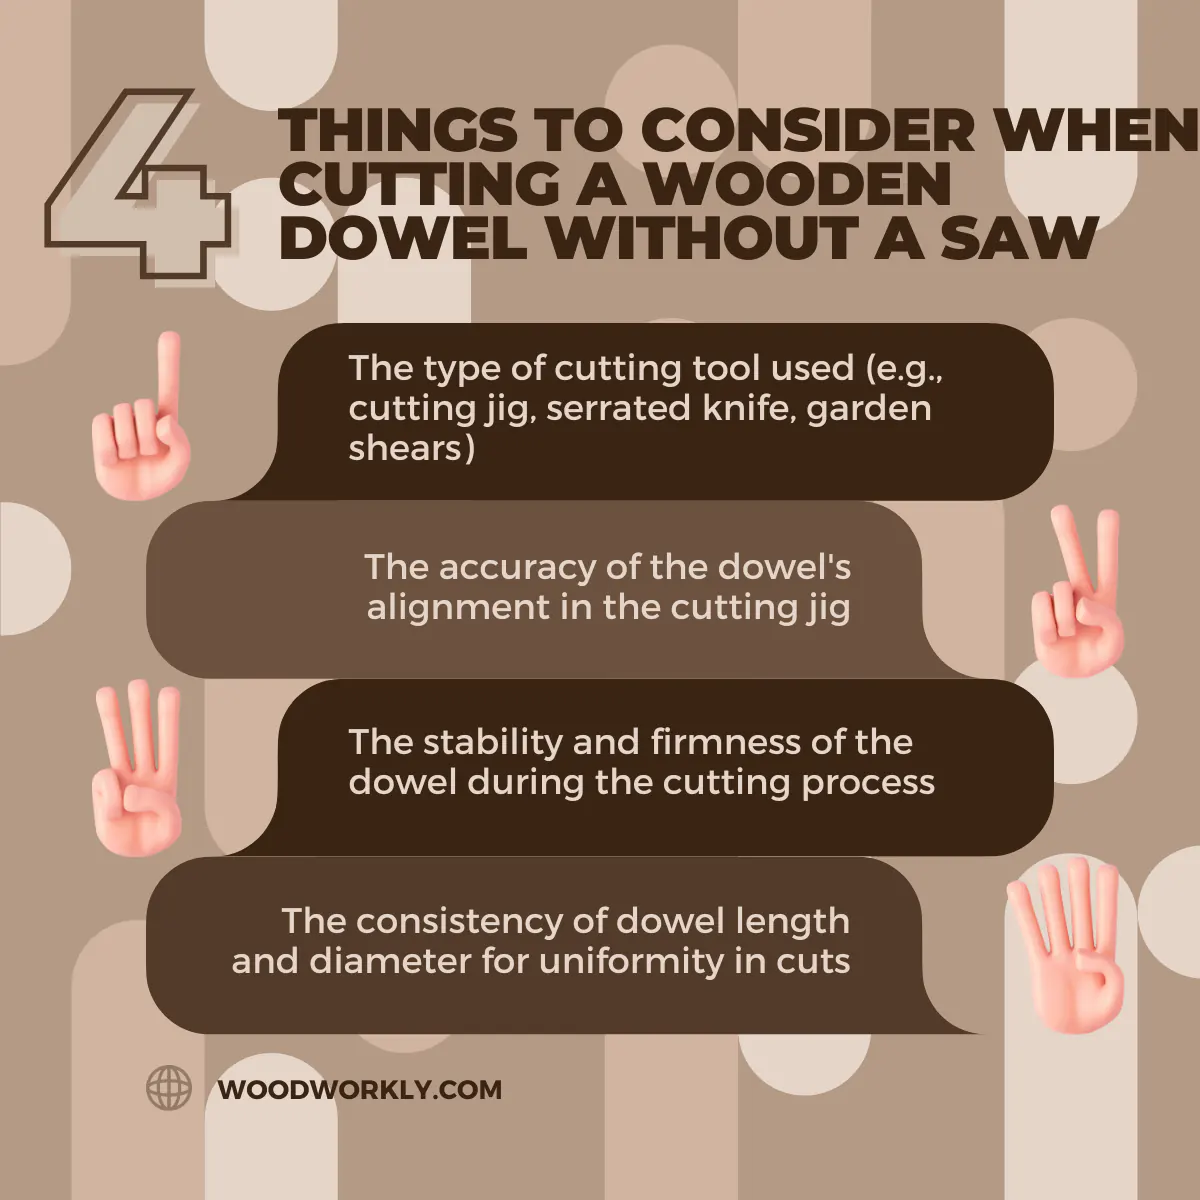 Things to consider when cutting a wooden dowel without a saw